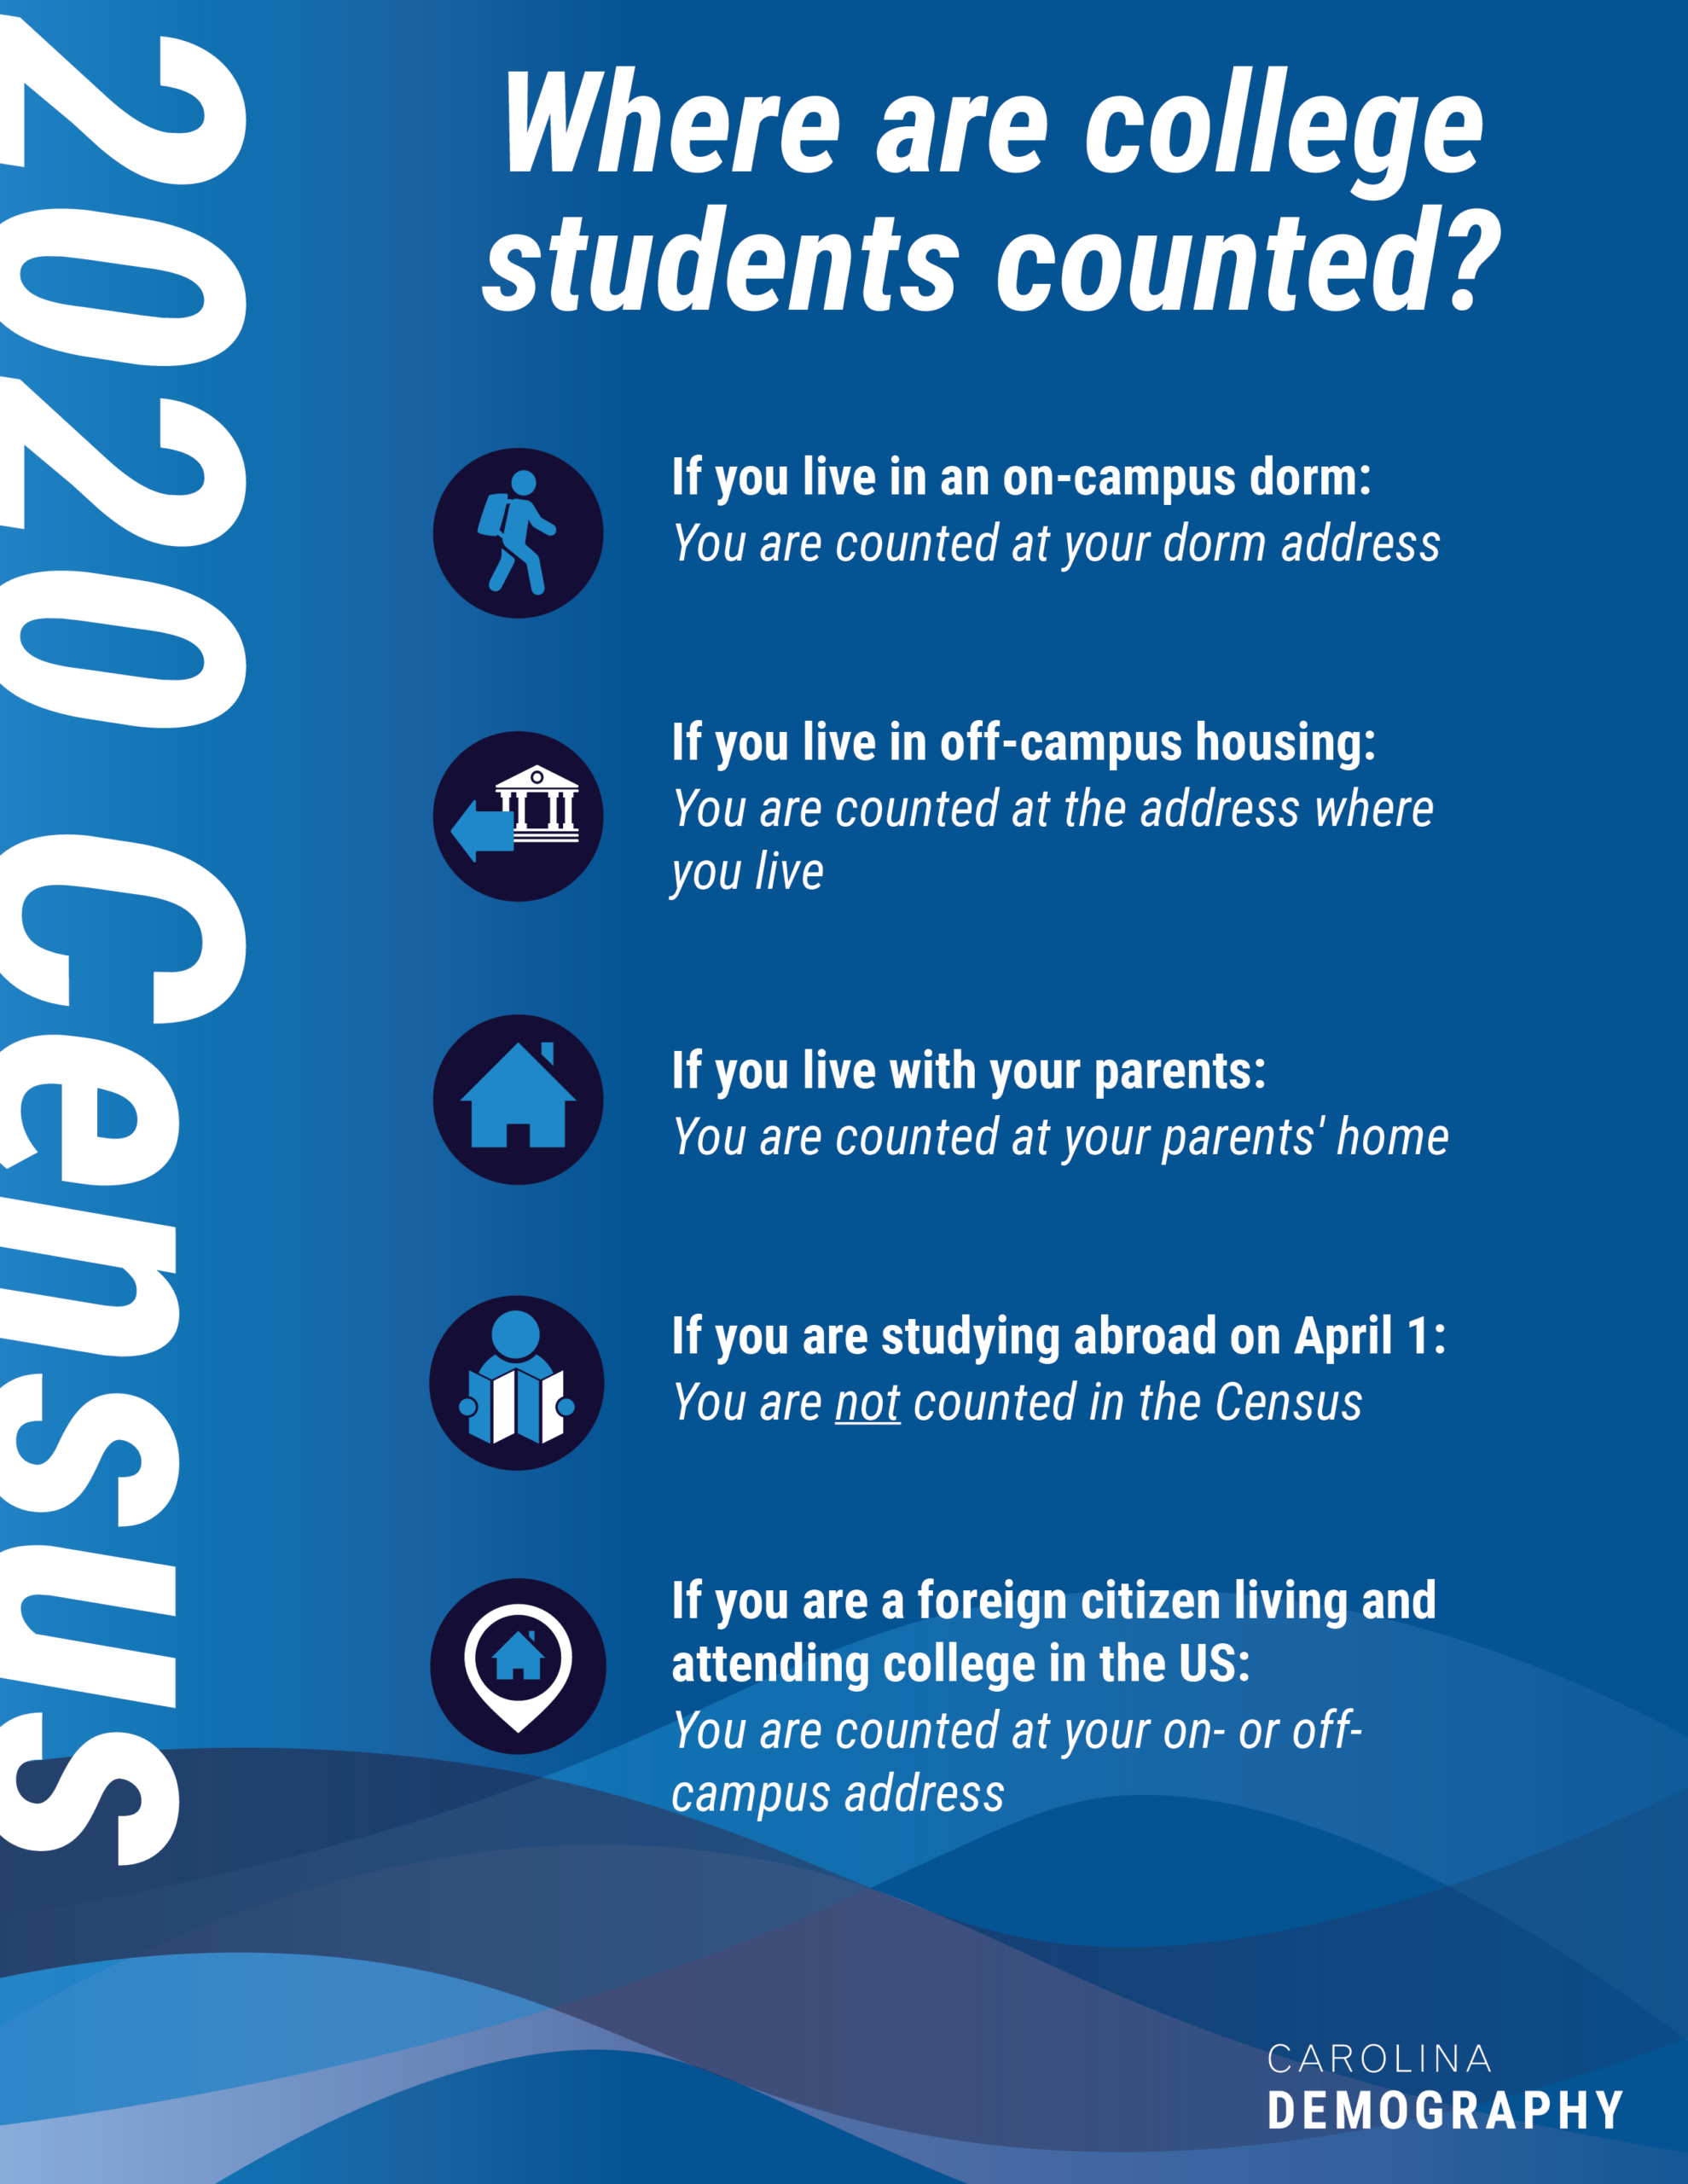 2020 Census: Where are college students counted? If you live in an on-campus dorm: You are counted at your dorm address If you live in off-campus housing: You are counted at the address where you live If you live with your parents: You are counted at your parents' home If you are studying abroad on April 1: You are not counted in the Census If you are a foreign citizen living and attending college in the US: You are counted at your on- or off- campus address